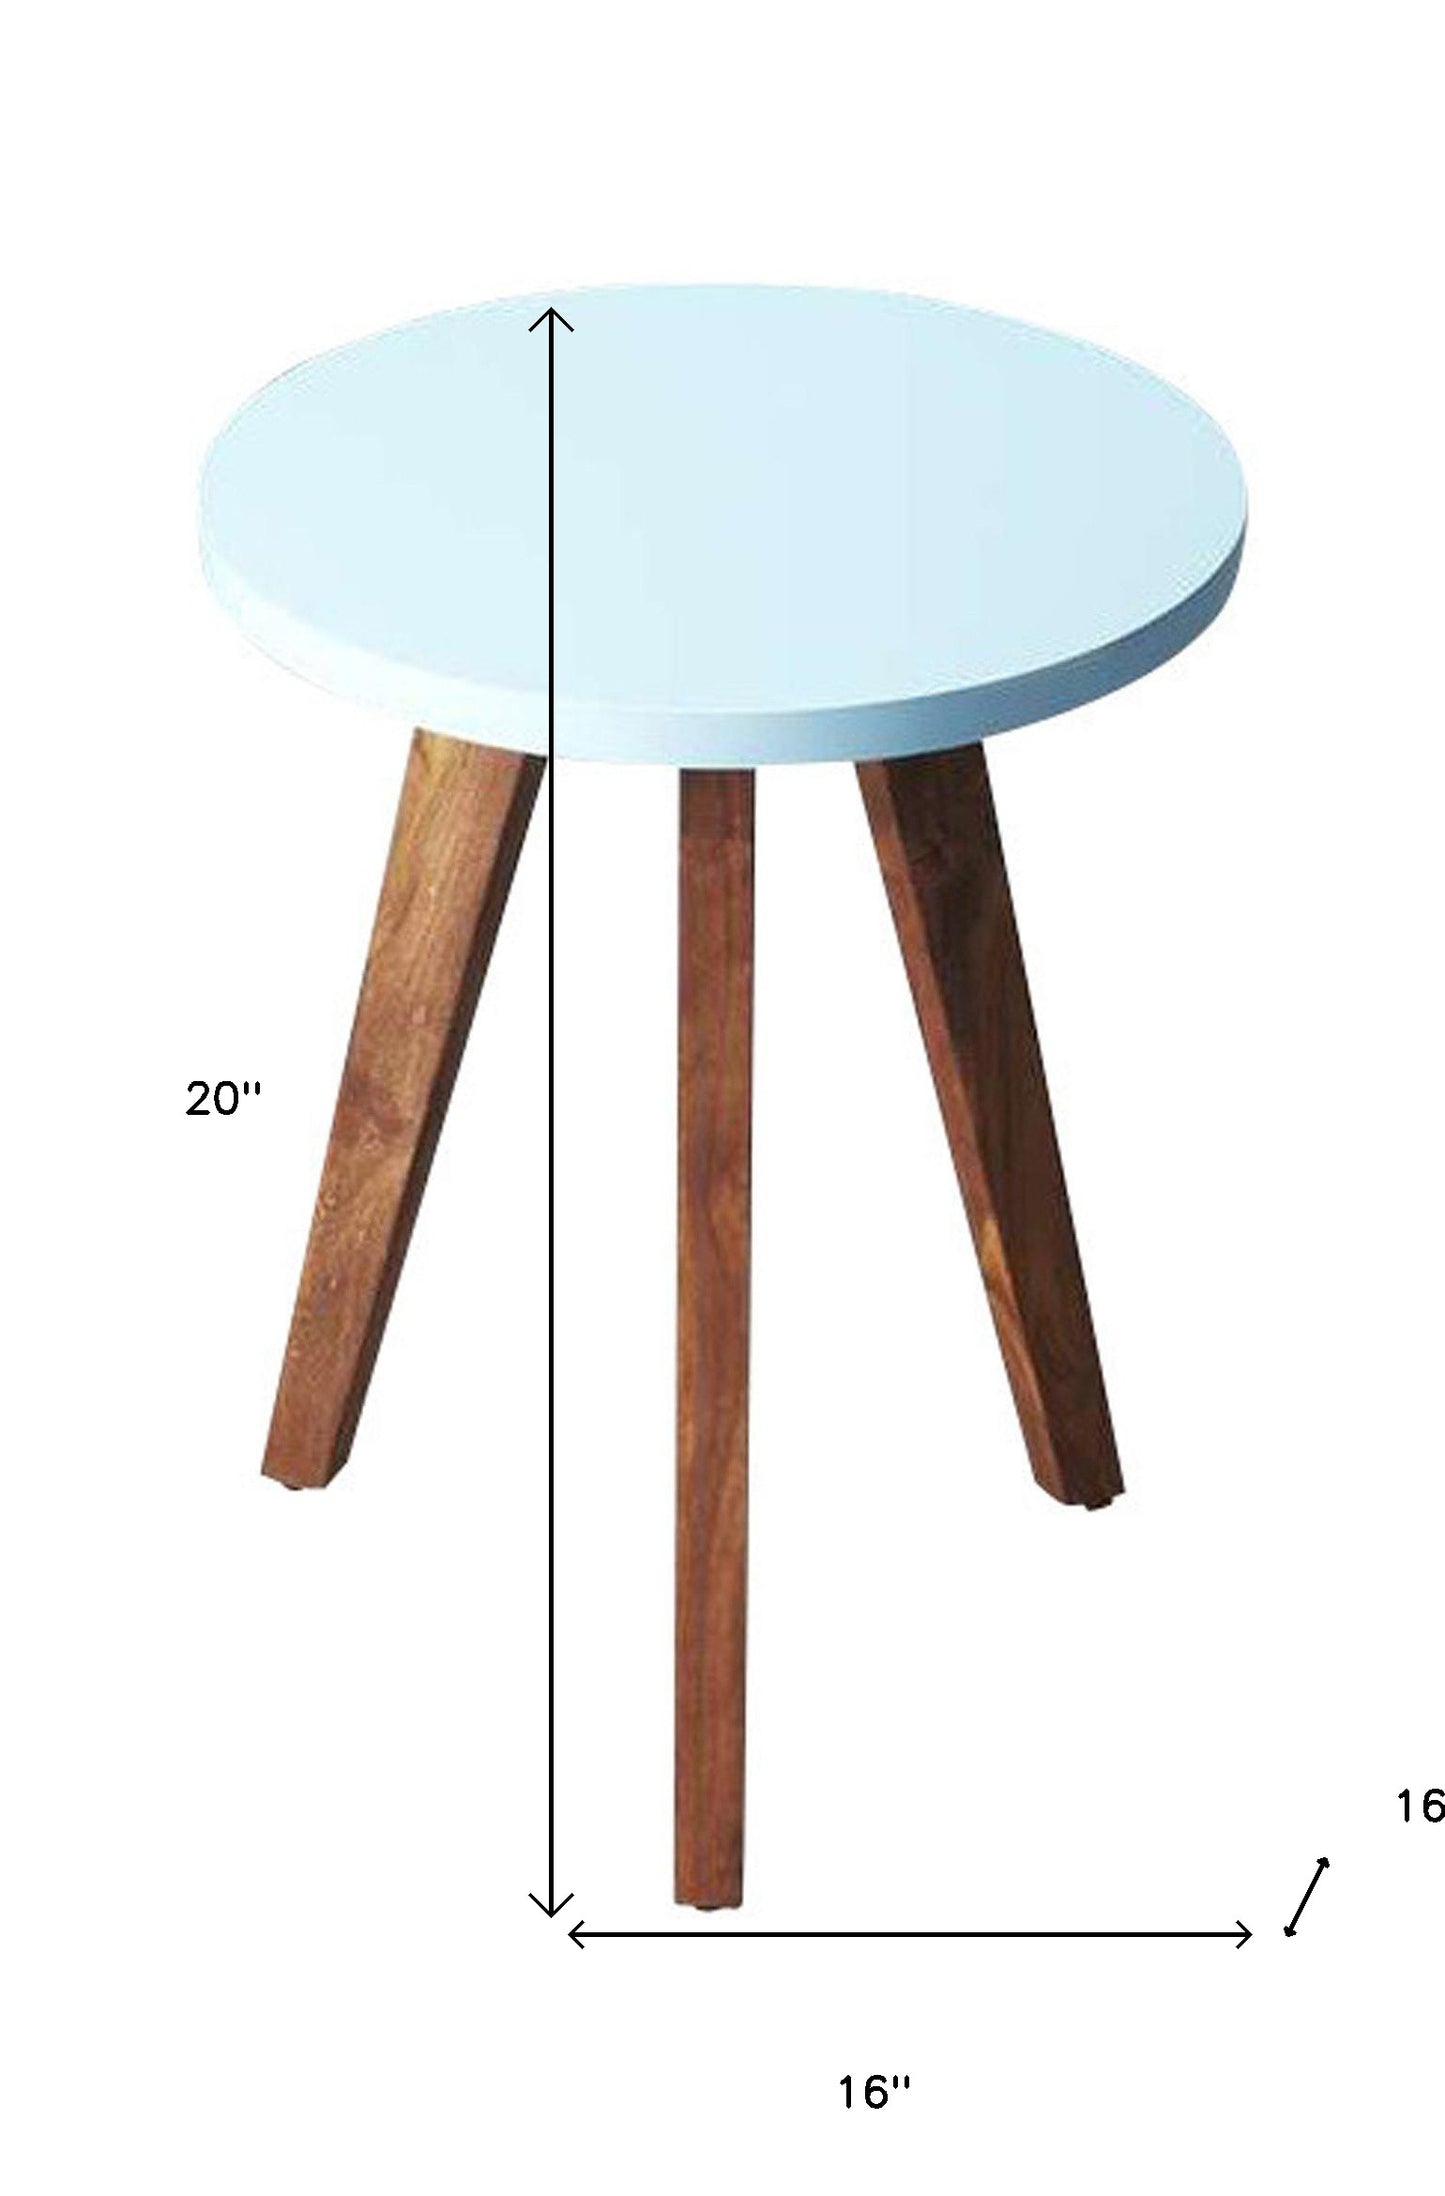 20" Brown And White Manufactured Wood Round End Table